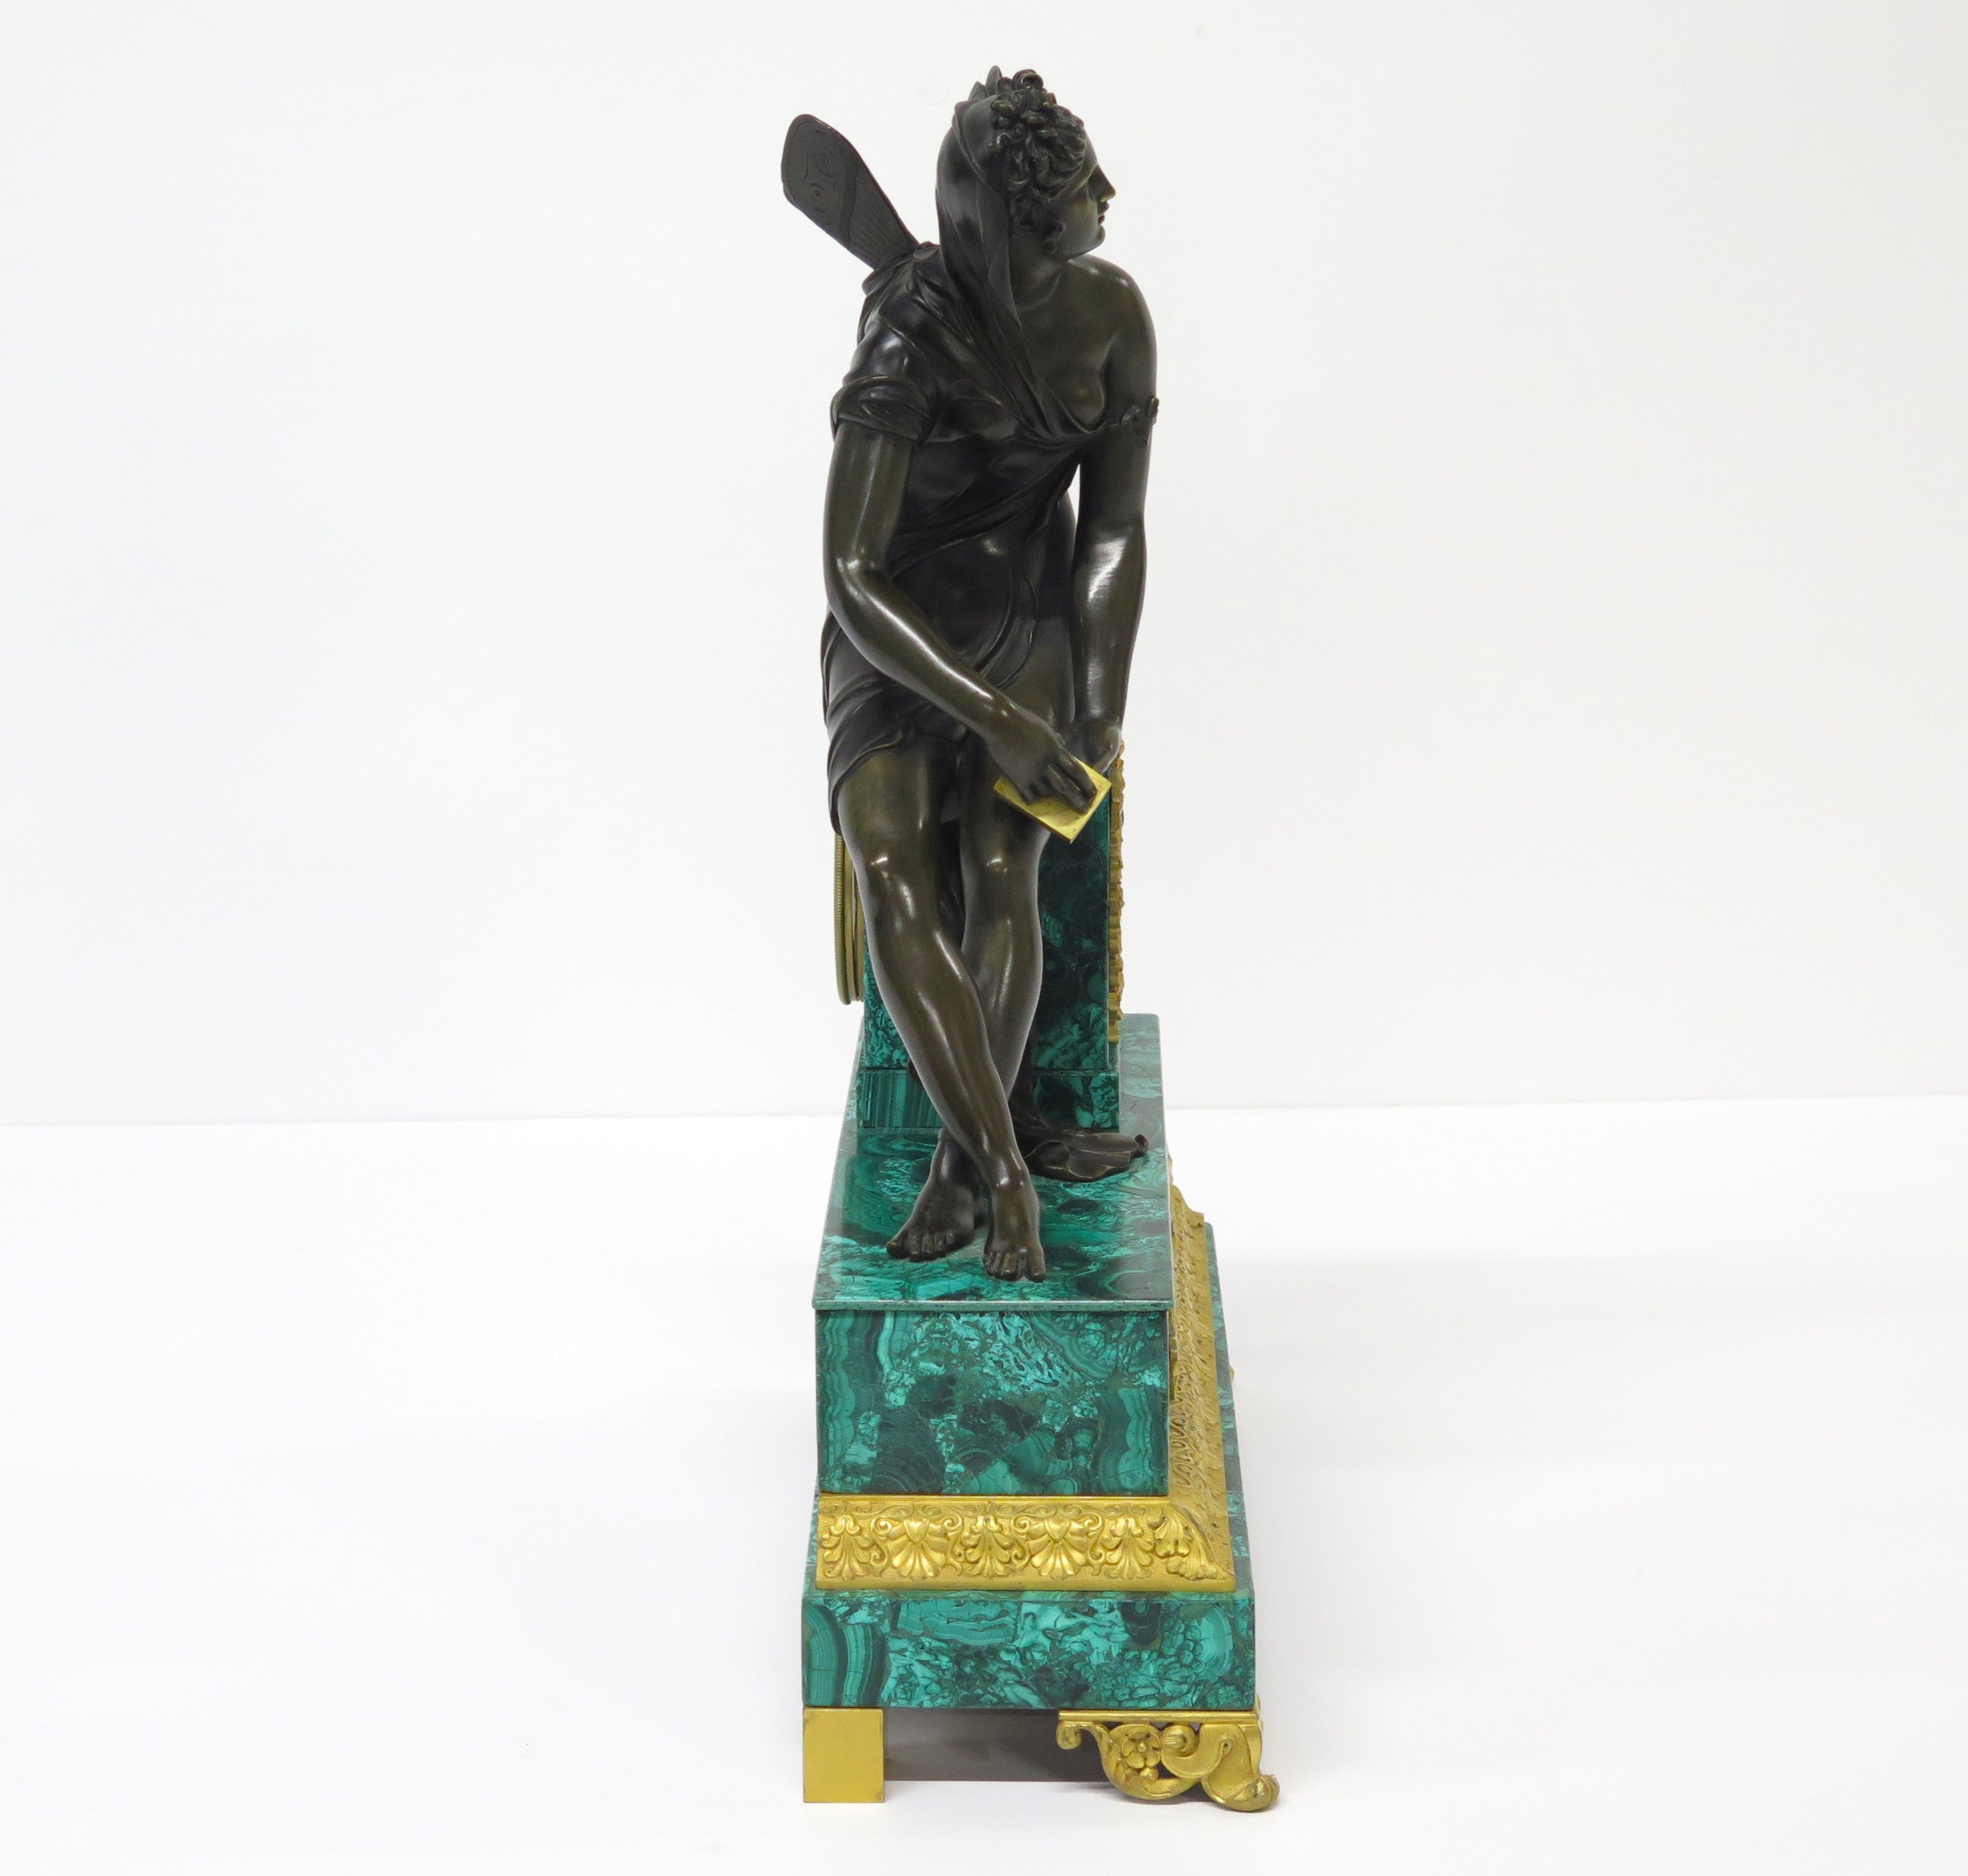 Charles X Malachite and Ormolu Mantel Clock / Psyche and the Golden Box